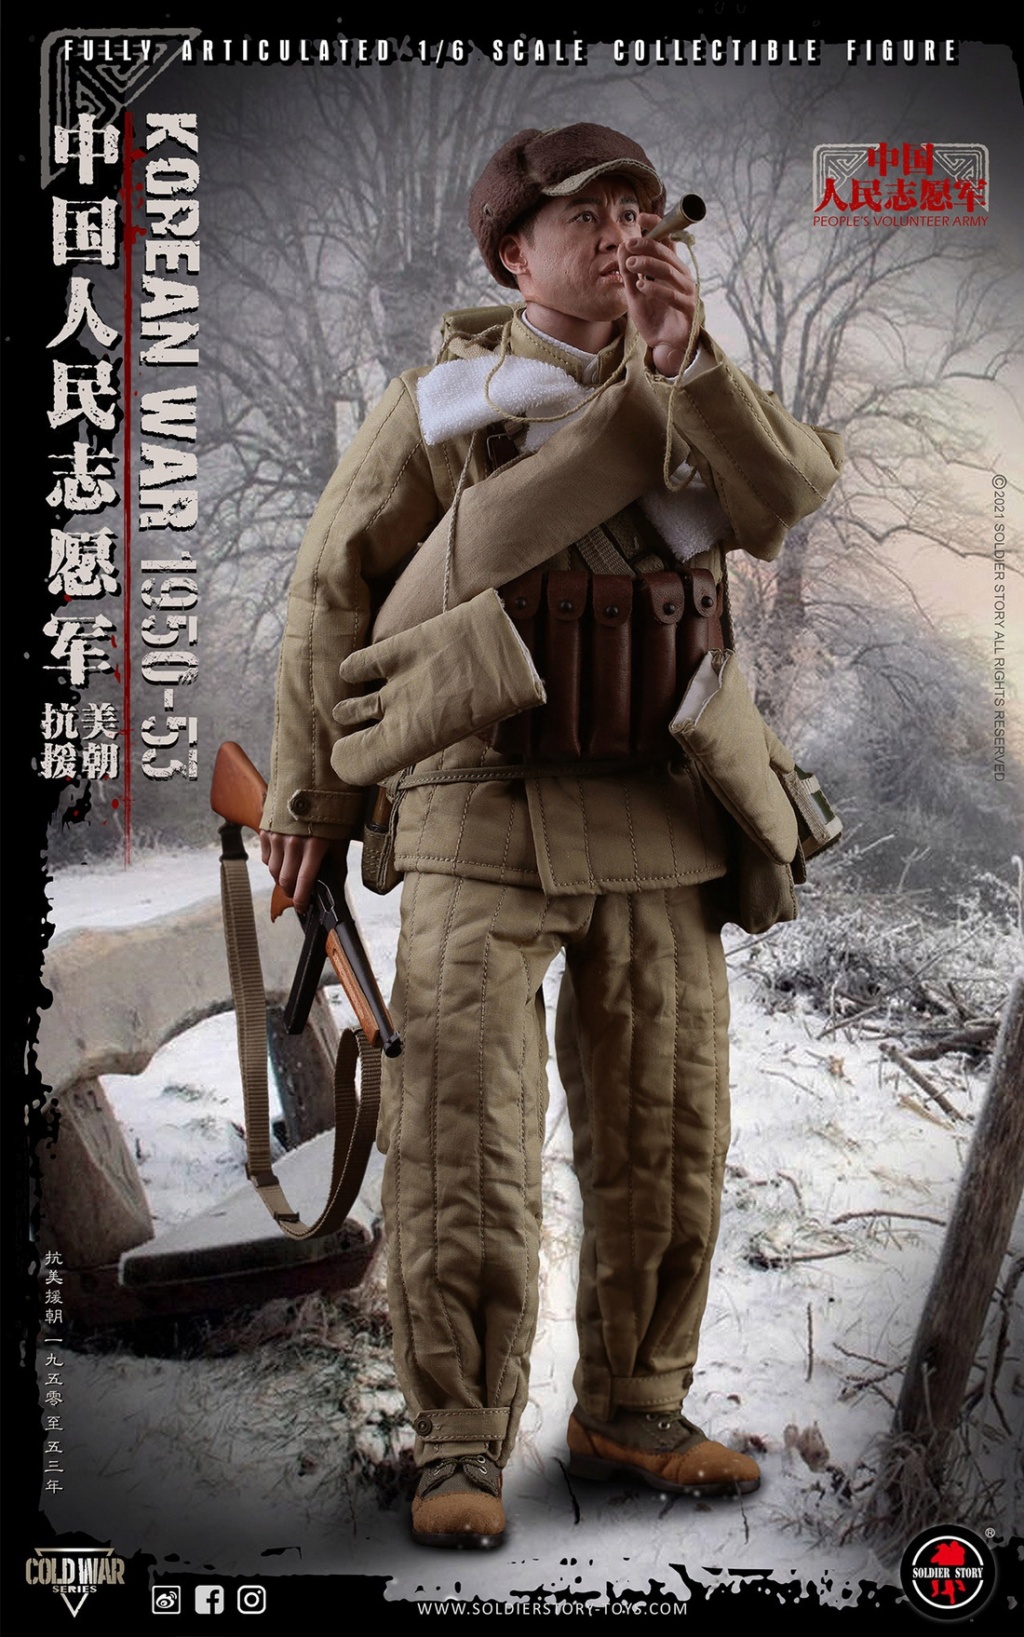 Soldierstory - NEW PRODUCT: SOLDIER STORY: 1/6 Chinese People’s Volunteers 1950-53 Collectible Action Figure (#SS-124) 69bd8310